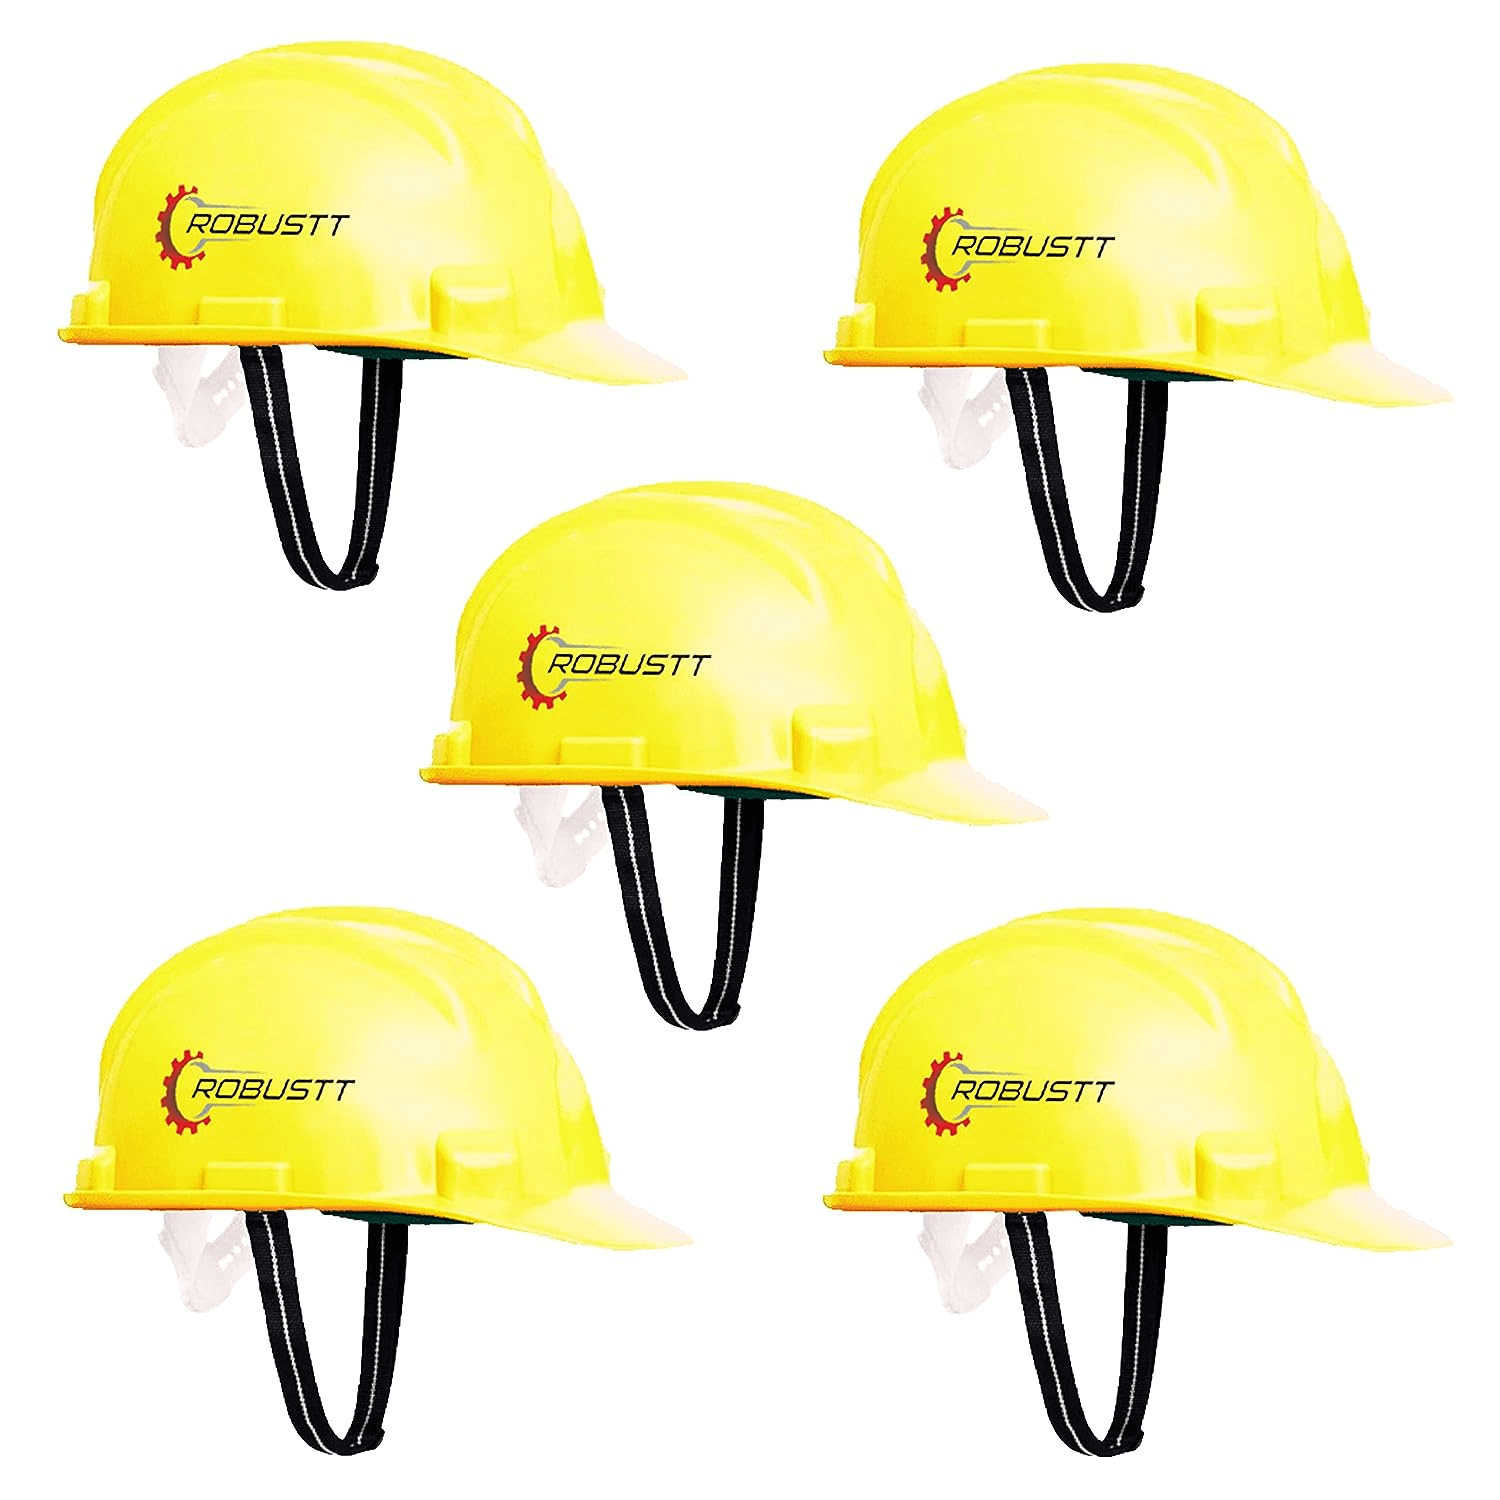 robustt-x-shree-jee-nape-type-yellow-adjusment-safety-helmet-construction-helmet-protection-for-outdoor-work-head-safety-hat-pack-of-5